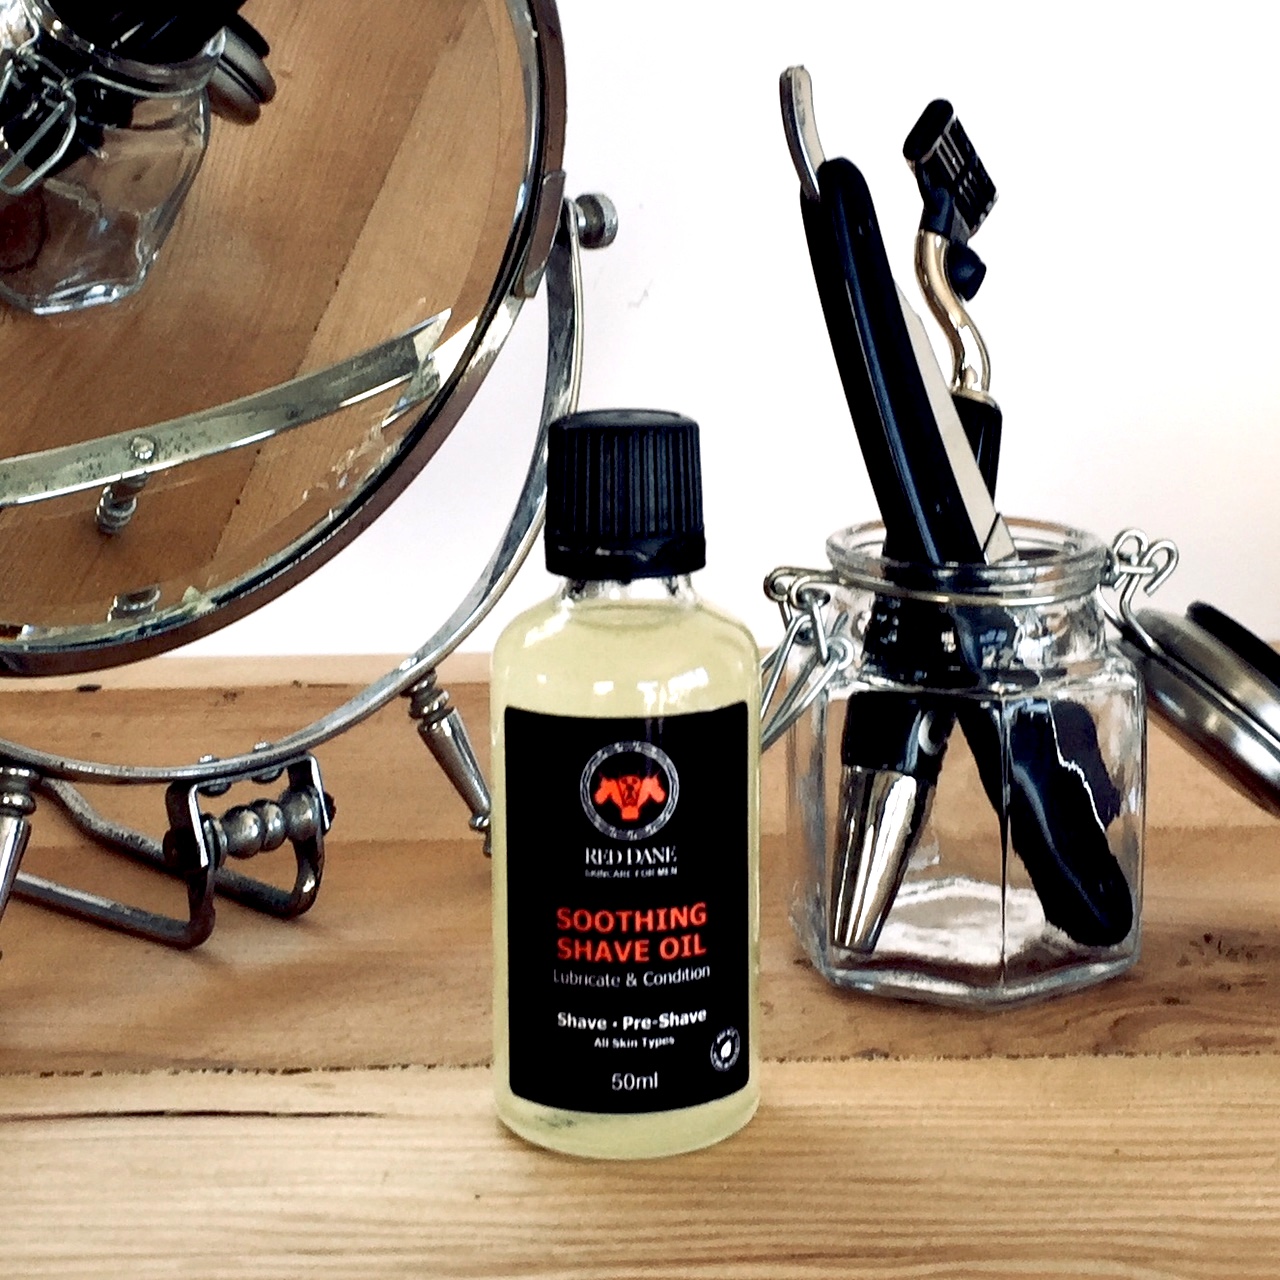 RED DANE | SOOTHING SHAVE OIL